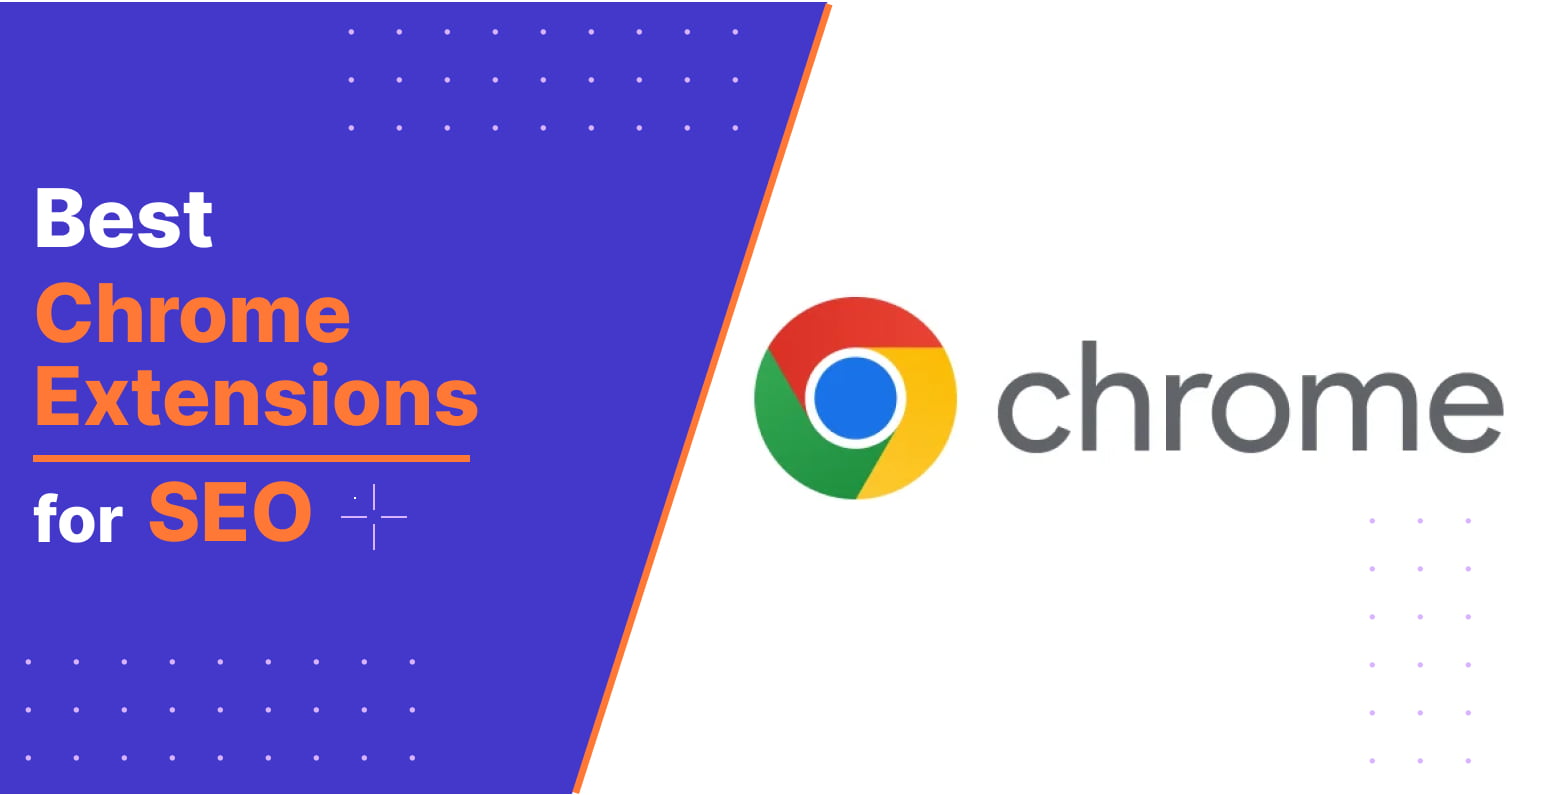 Best chrome extensions for SEO